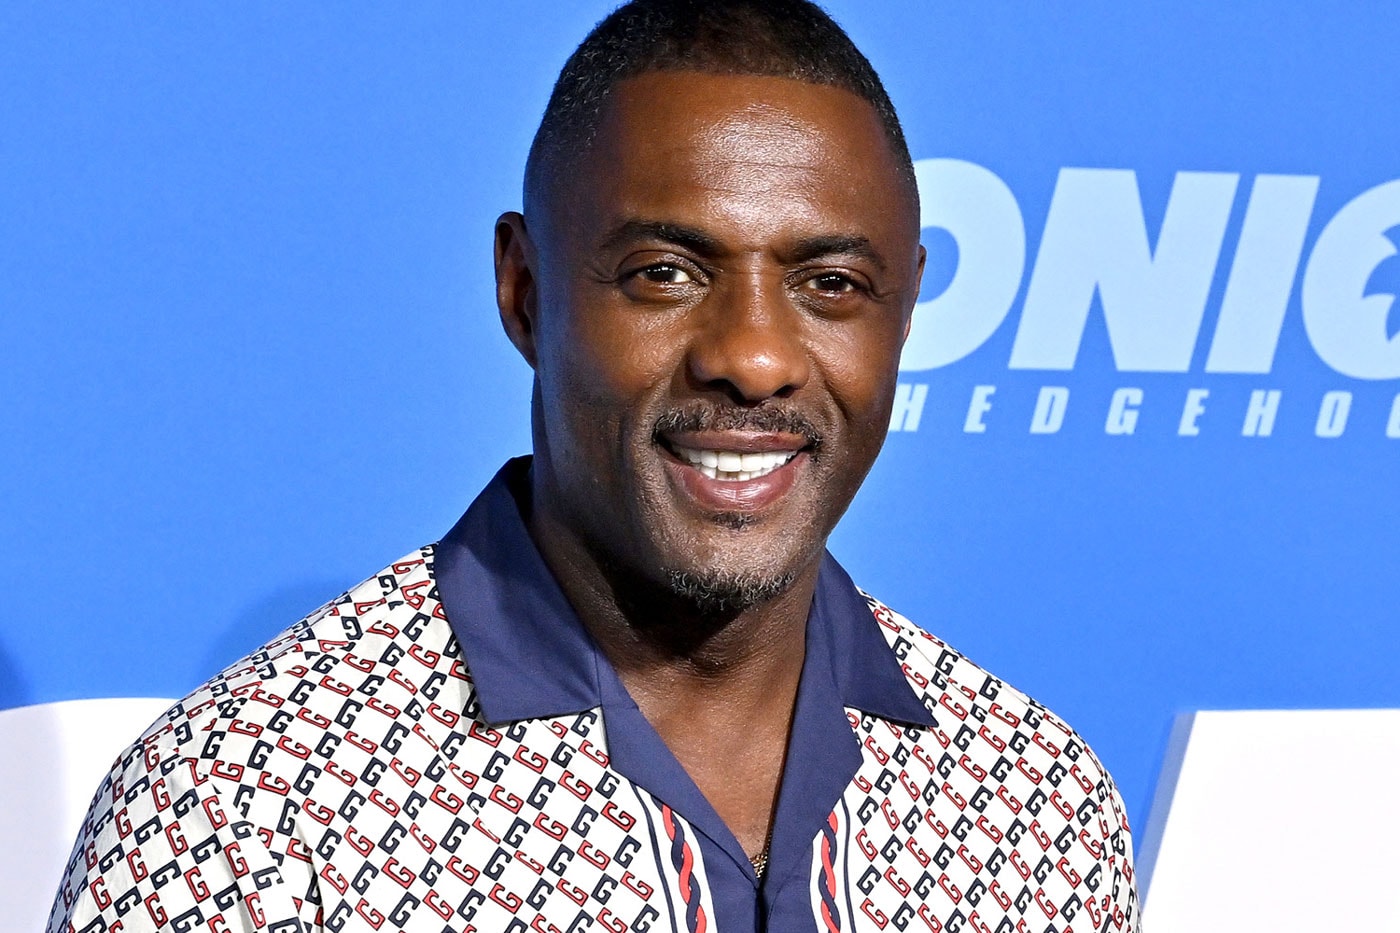 Idris Elba Lives His "Fantasy" & Releases Album & Video Inspired by TV Role